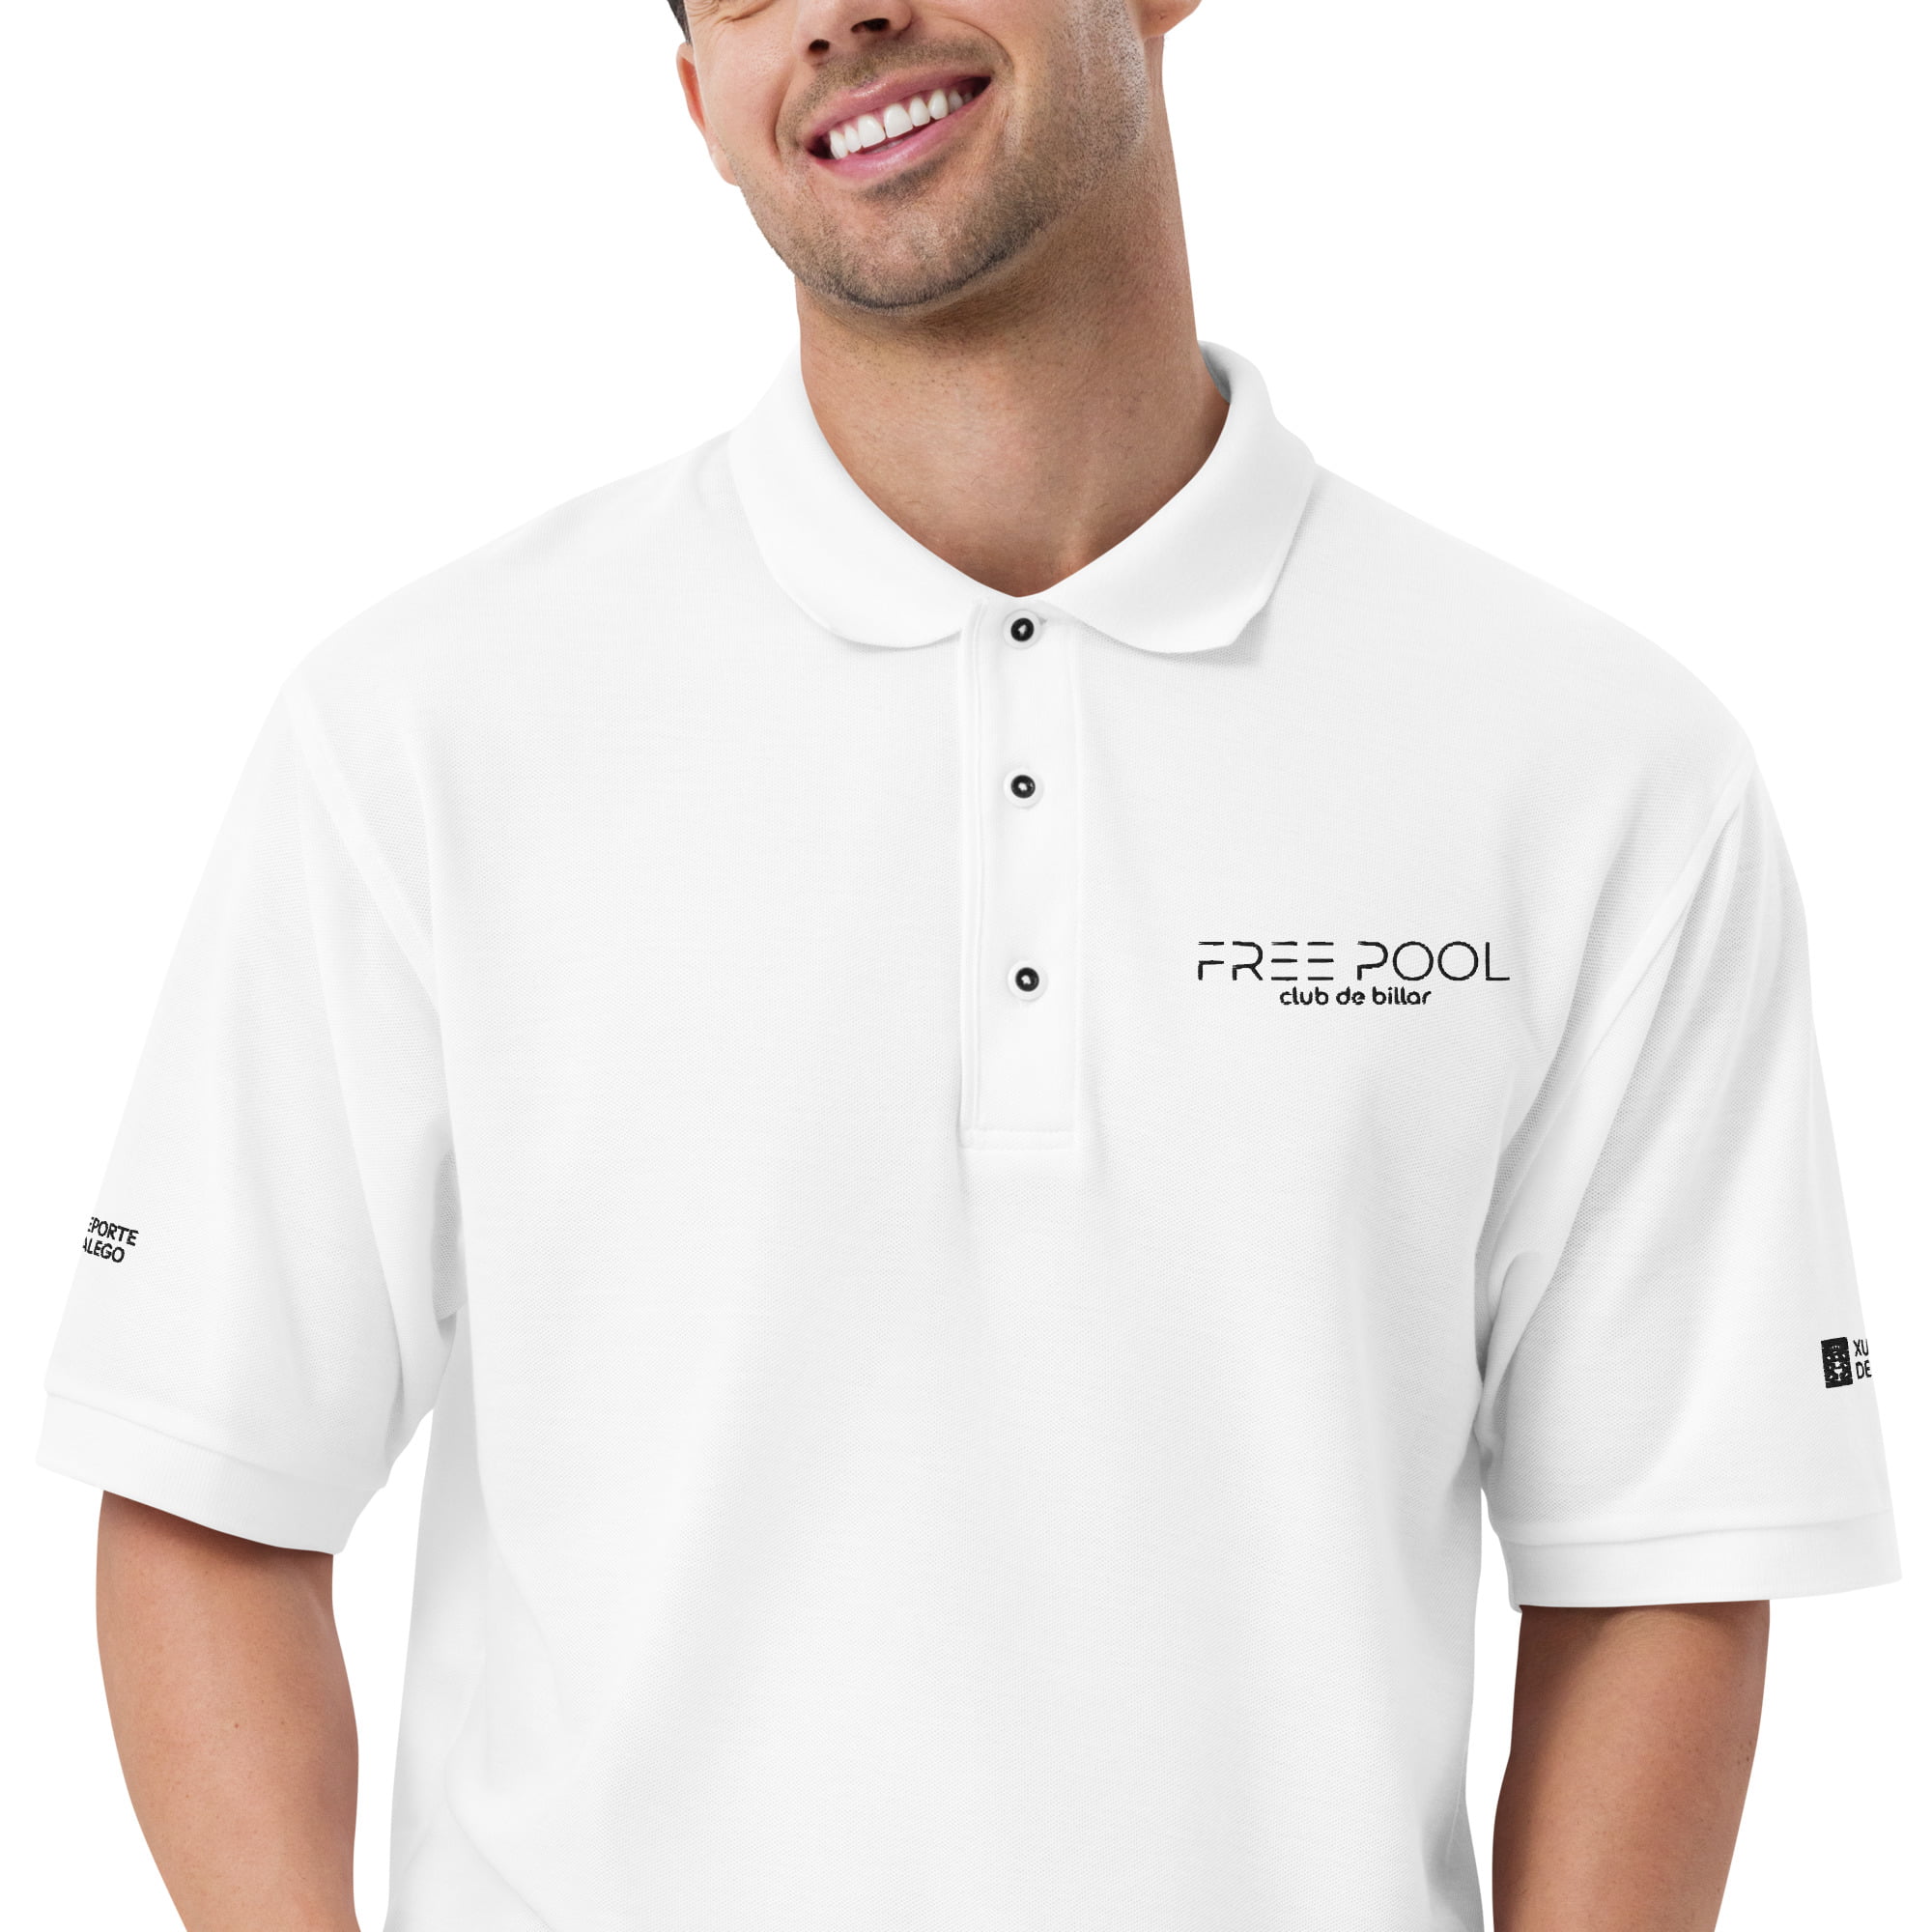 premium-polo-shirt-white-zoomed-in-6486495a8421a.jpg